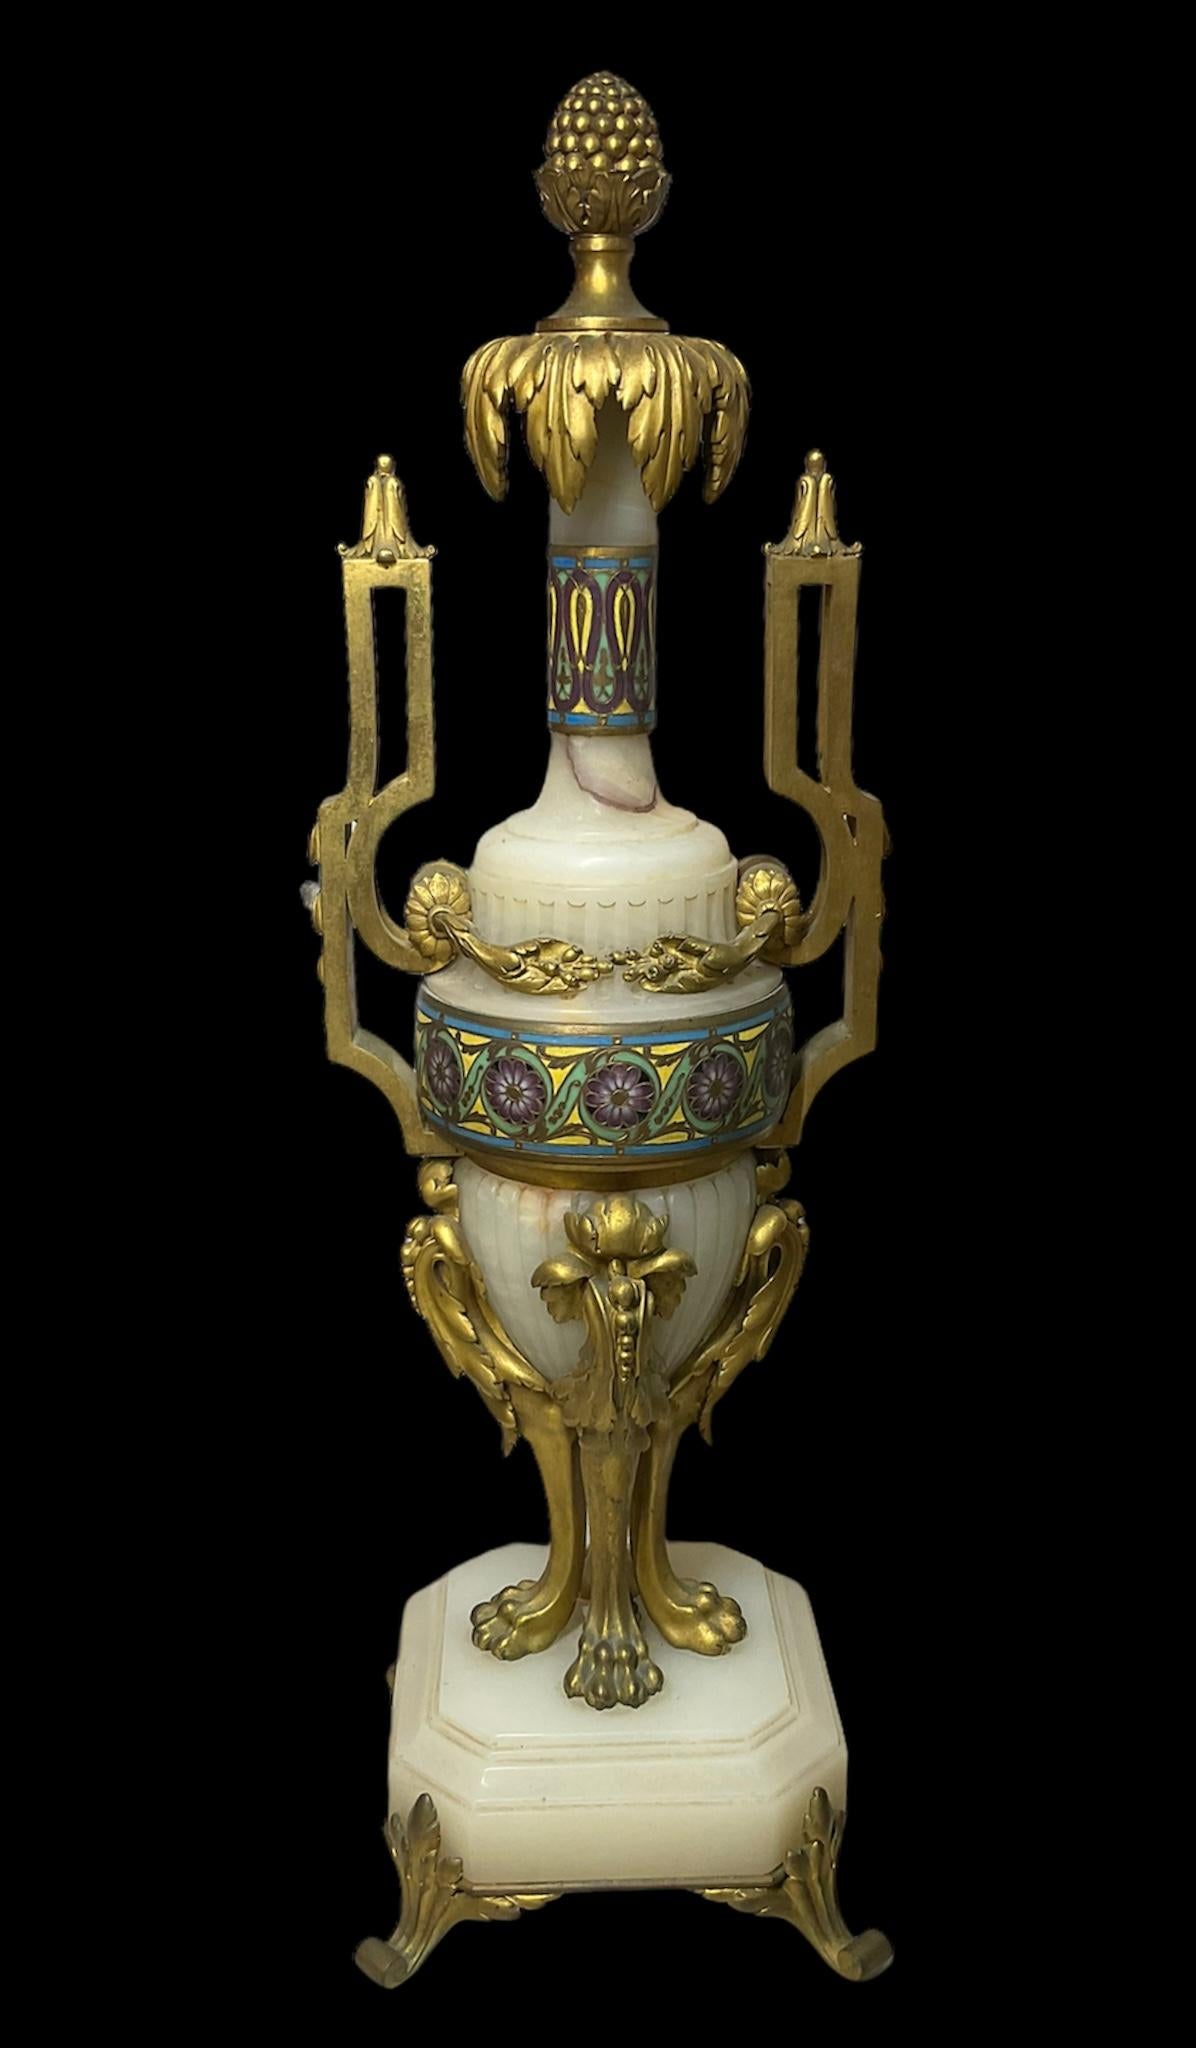 This is a Ferdinand Barbedienne set of gilt bronze-mounted champleve onyx garniture. It consist of two urns and one large oval vase/jardiniere. The vase is adorned with a chain of gilt beads in its rim and from its gilt bronze scroll-rectangular